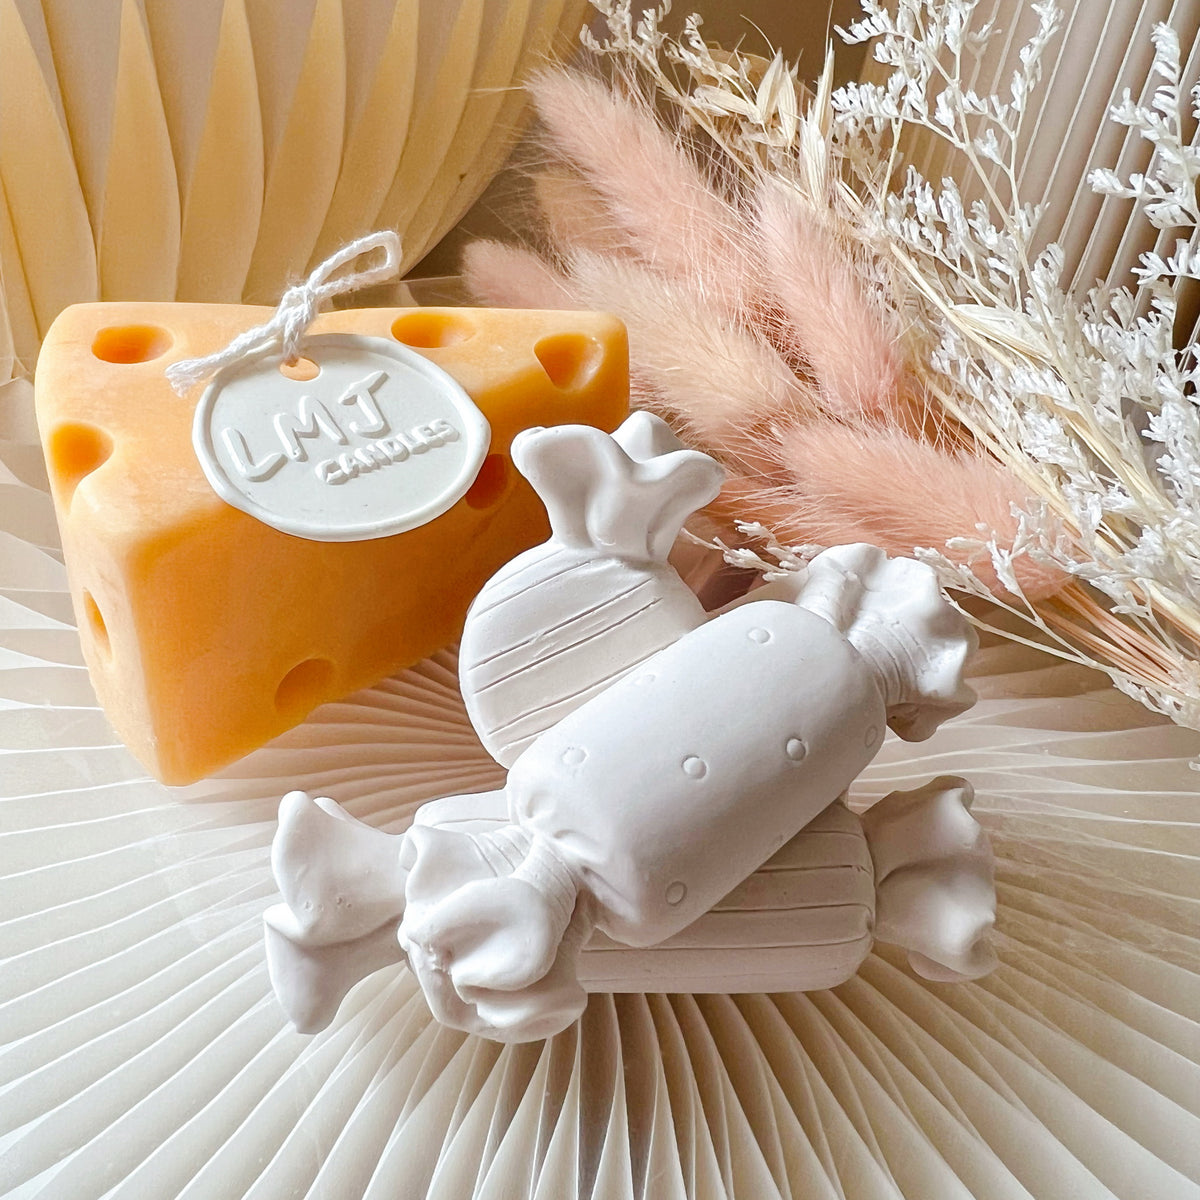 Candy Car Air Freshener, LMJ Candles offers a range of handmade scented air fresheners, featuring car vent clips, hanging diffusers, scented fridge magnets, aroma stone diffusers and decorative artworks.